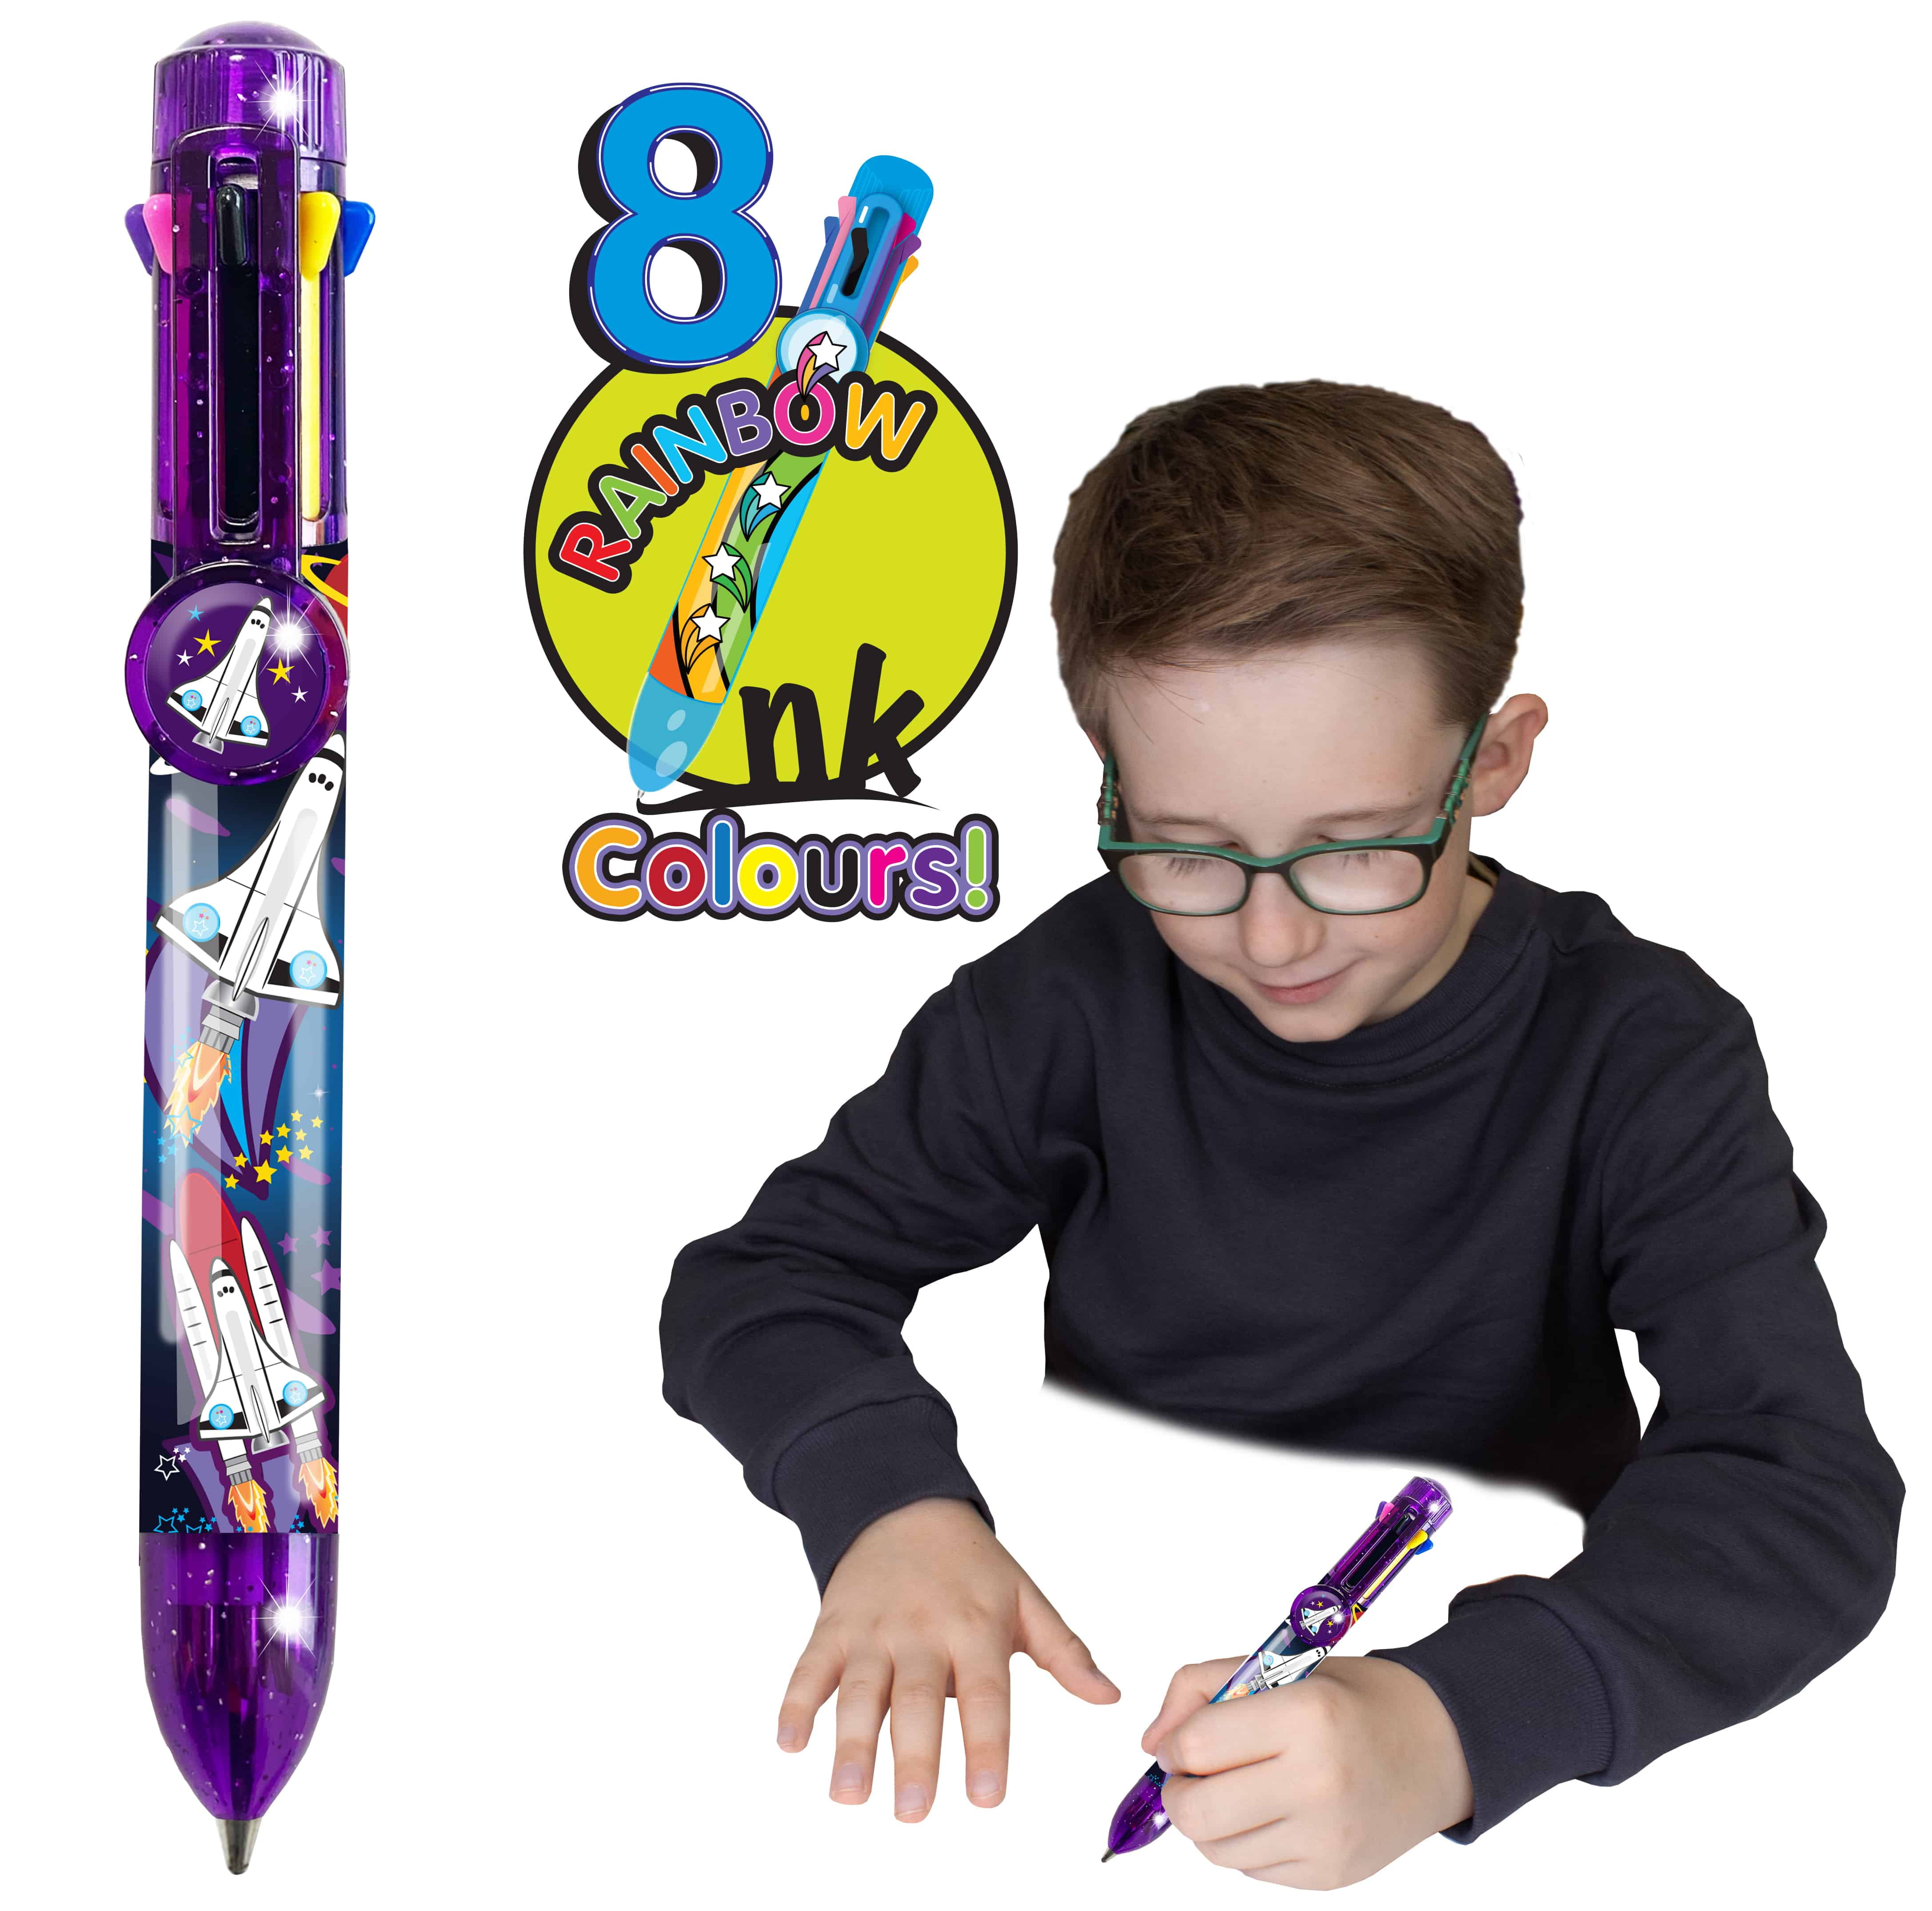 Rainbow Writer - Space Multicolor Pen from Deluxebase. 8 in 1 Retractable  Ballpoint Pen. Colored Pens for Kids Back to School Supplies and Office  Supplies. Space Pen Party Favors for Kids 